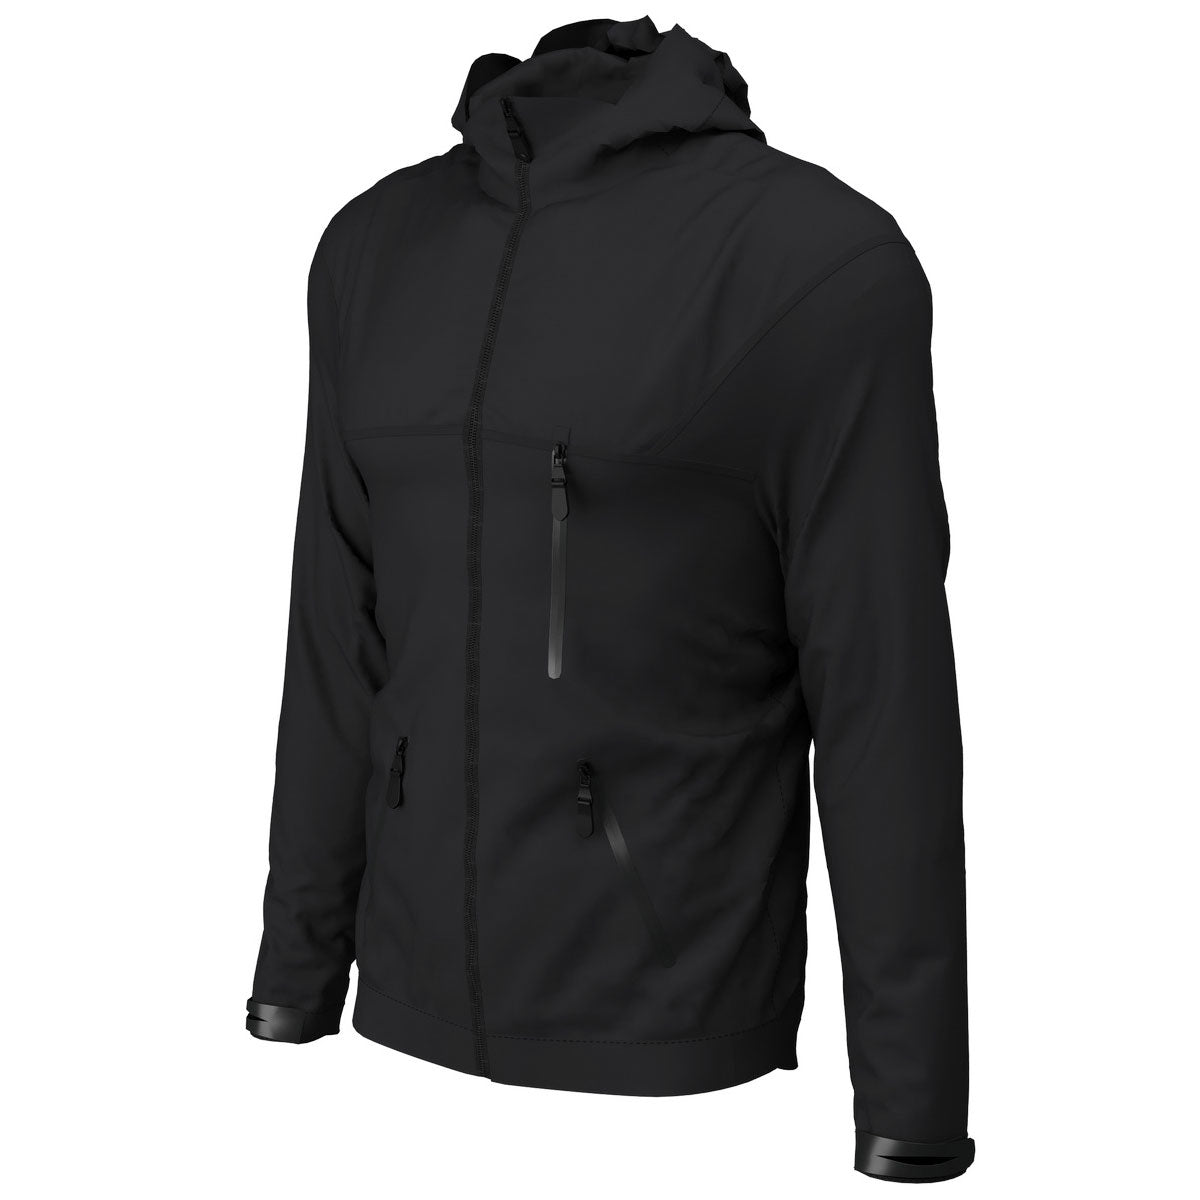 Mc Keever Technical Shell Jacket - Adult - Black